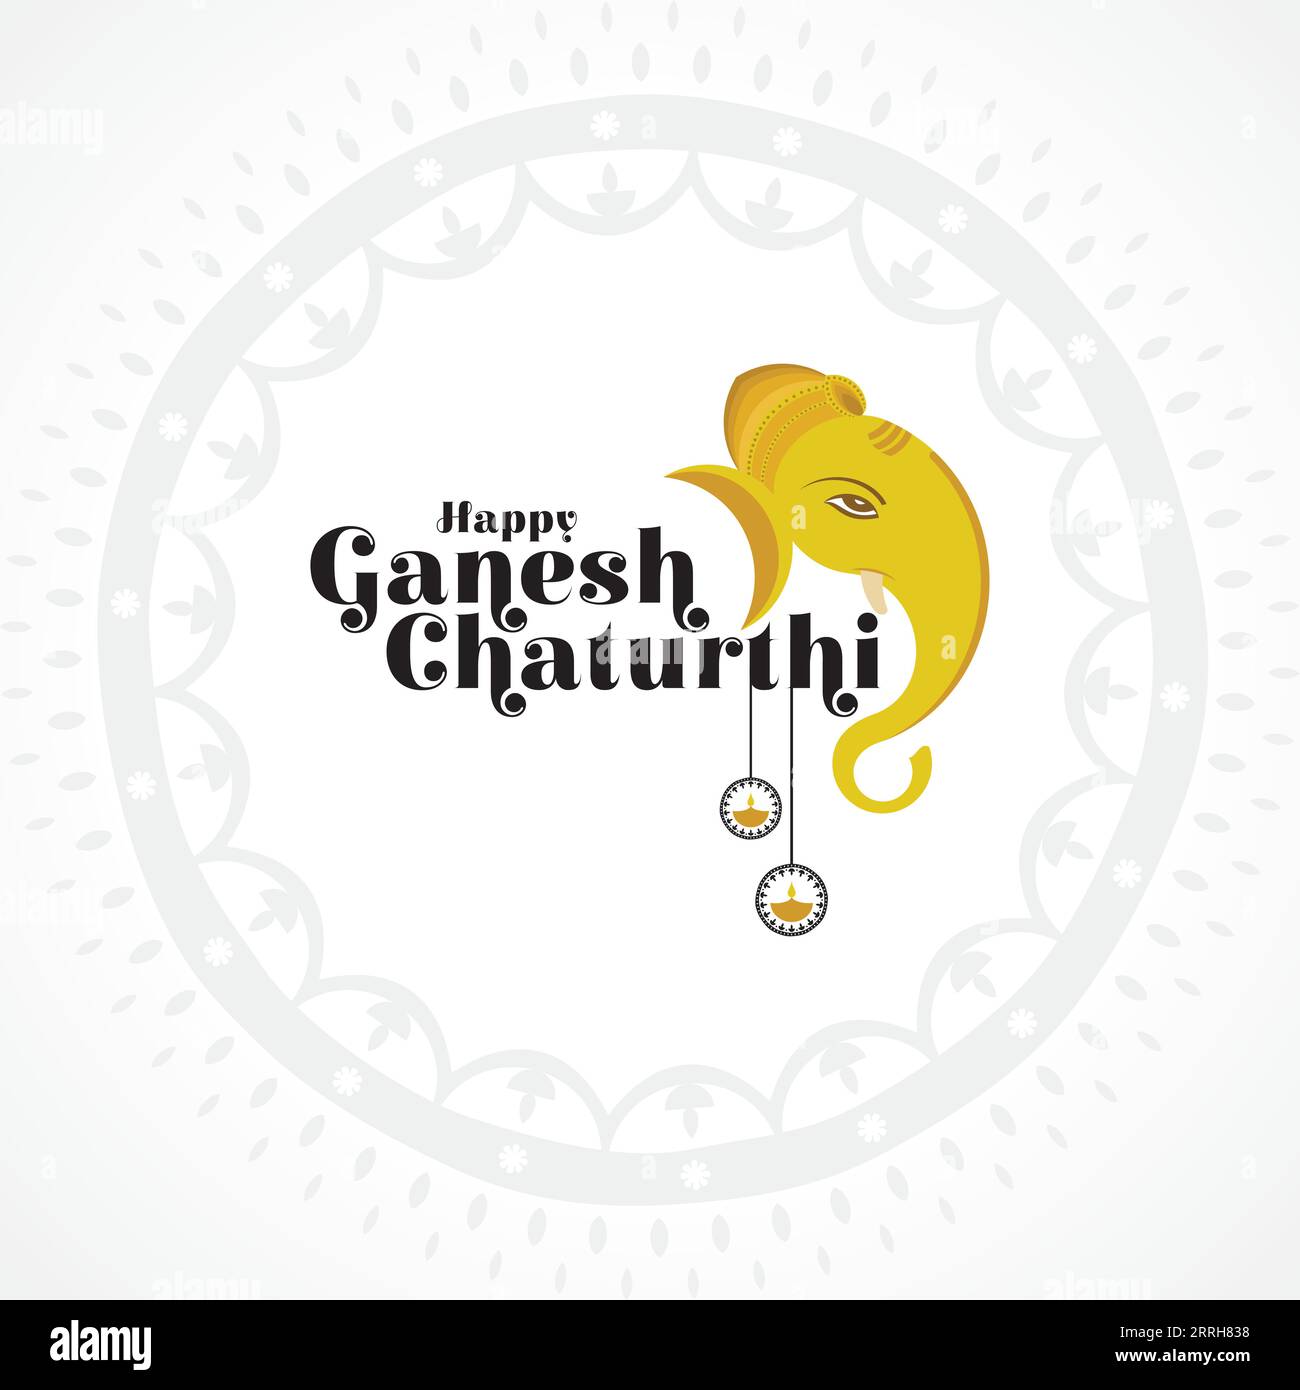 Vector Illustration of Happy Ganesh Chaturthi text and Ganesh with a background for banner, template, post, and invitation card design Stock Vector